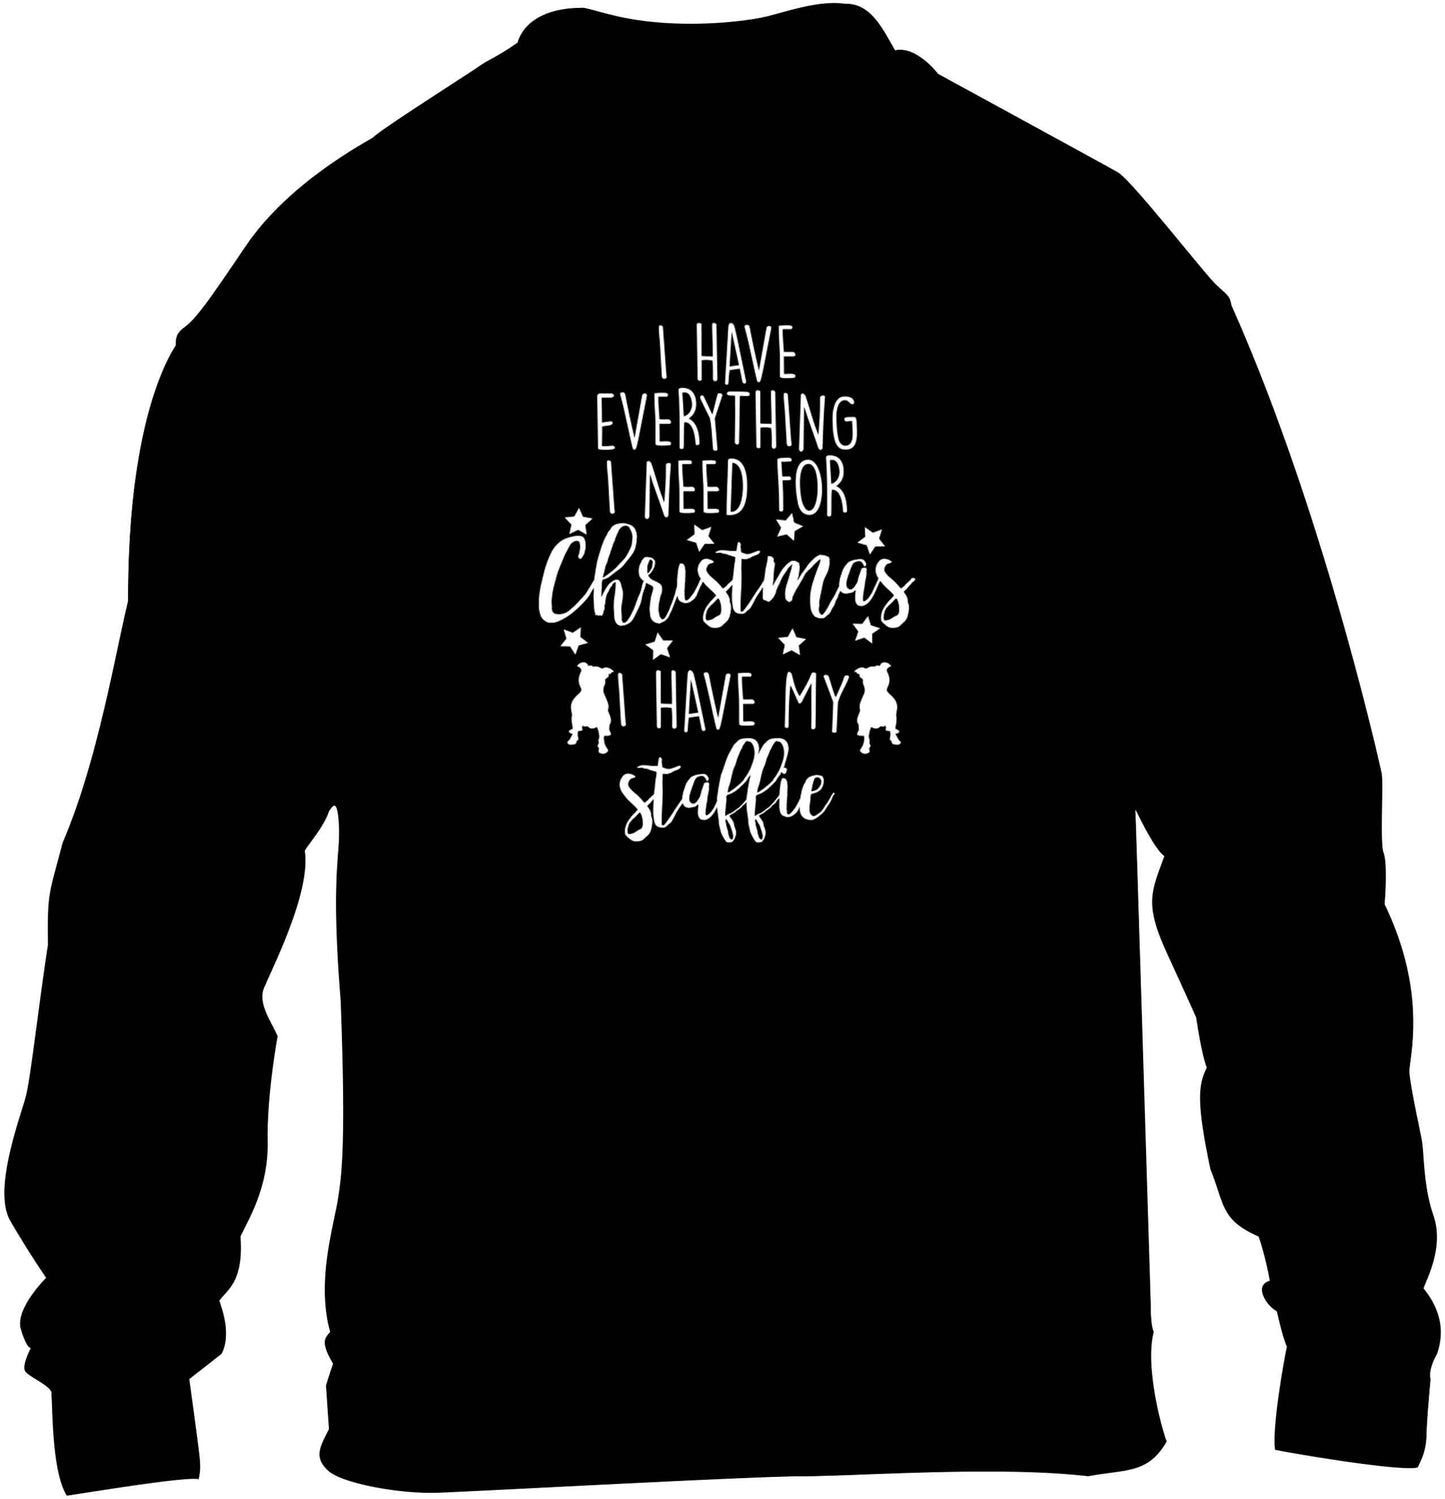 I have everything I need for Christmas I have my staffie children's black sweater 12-13 Years